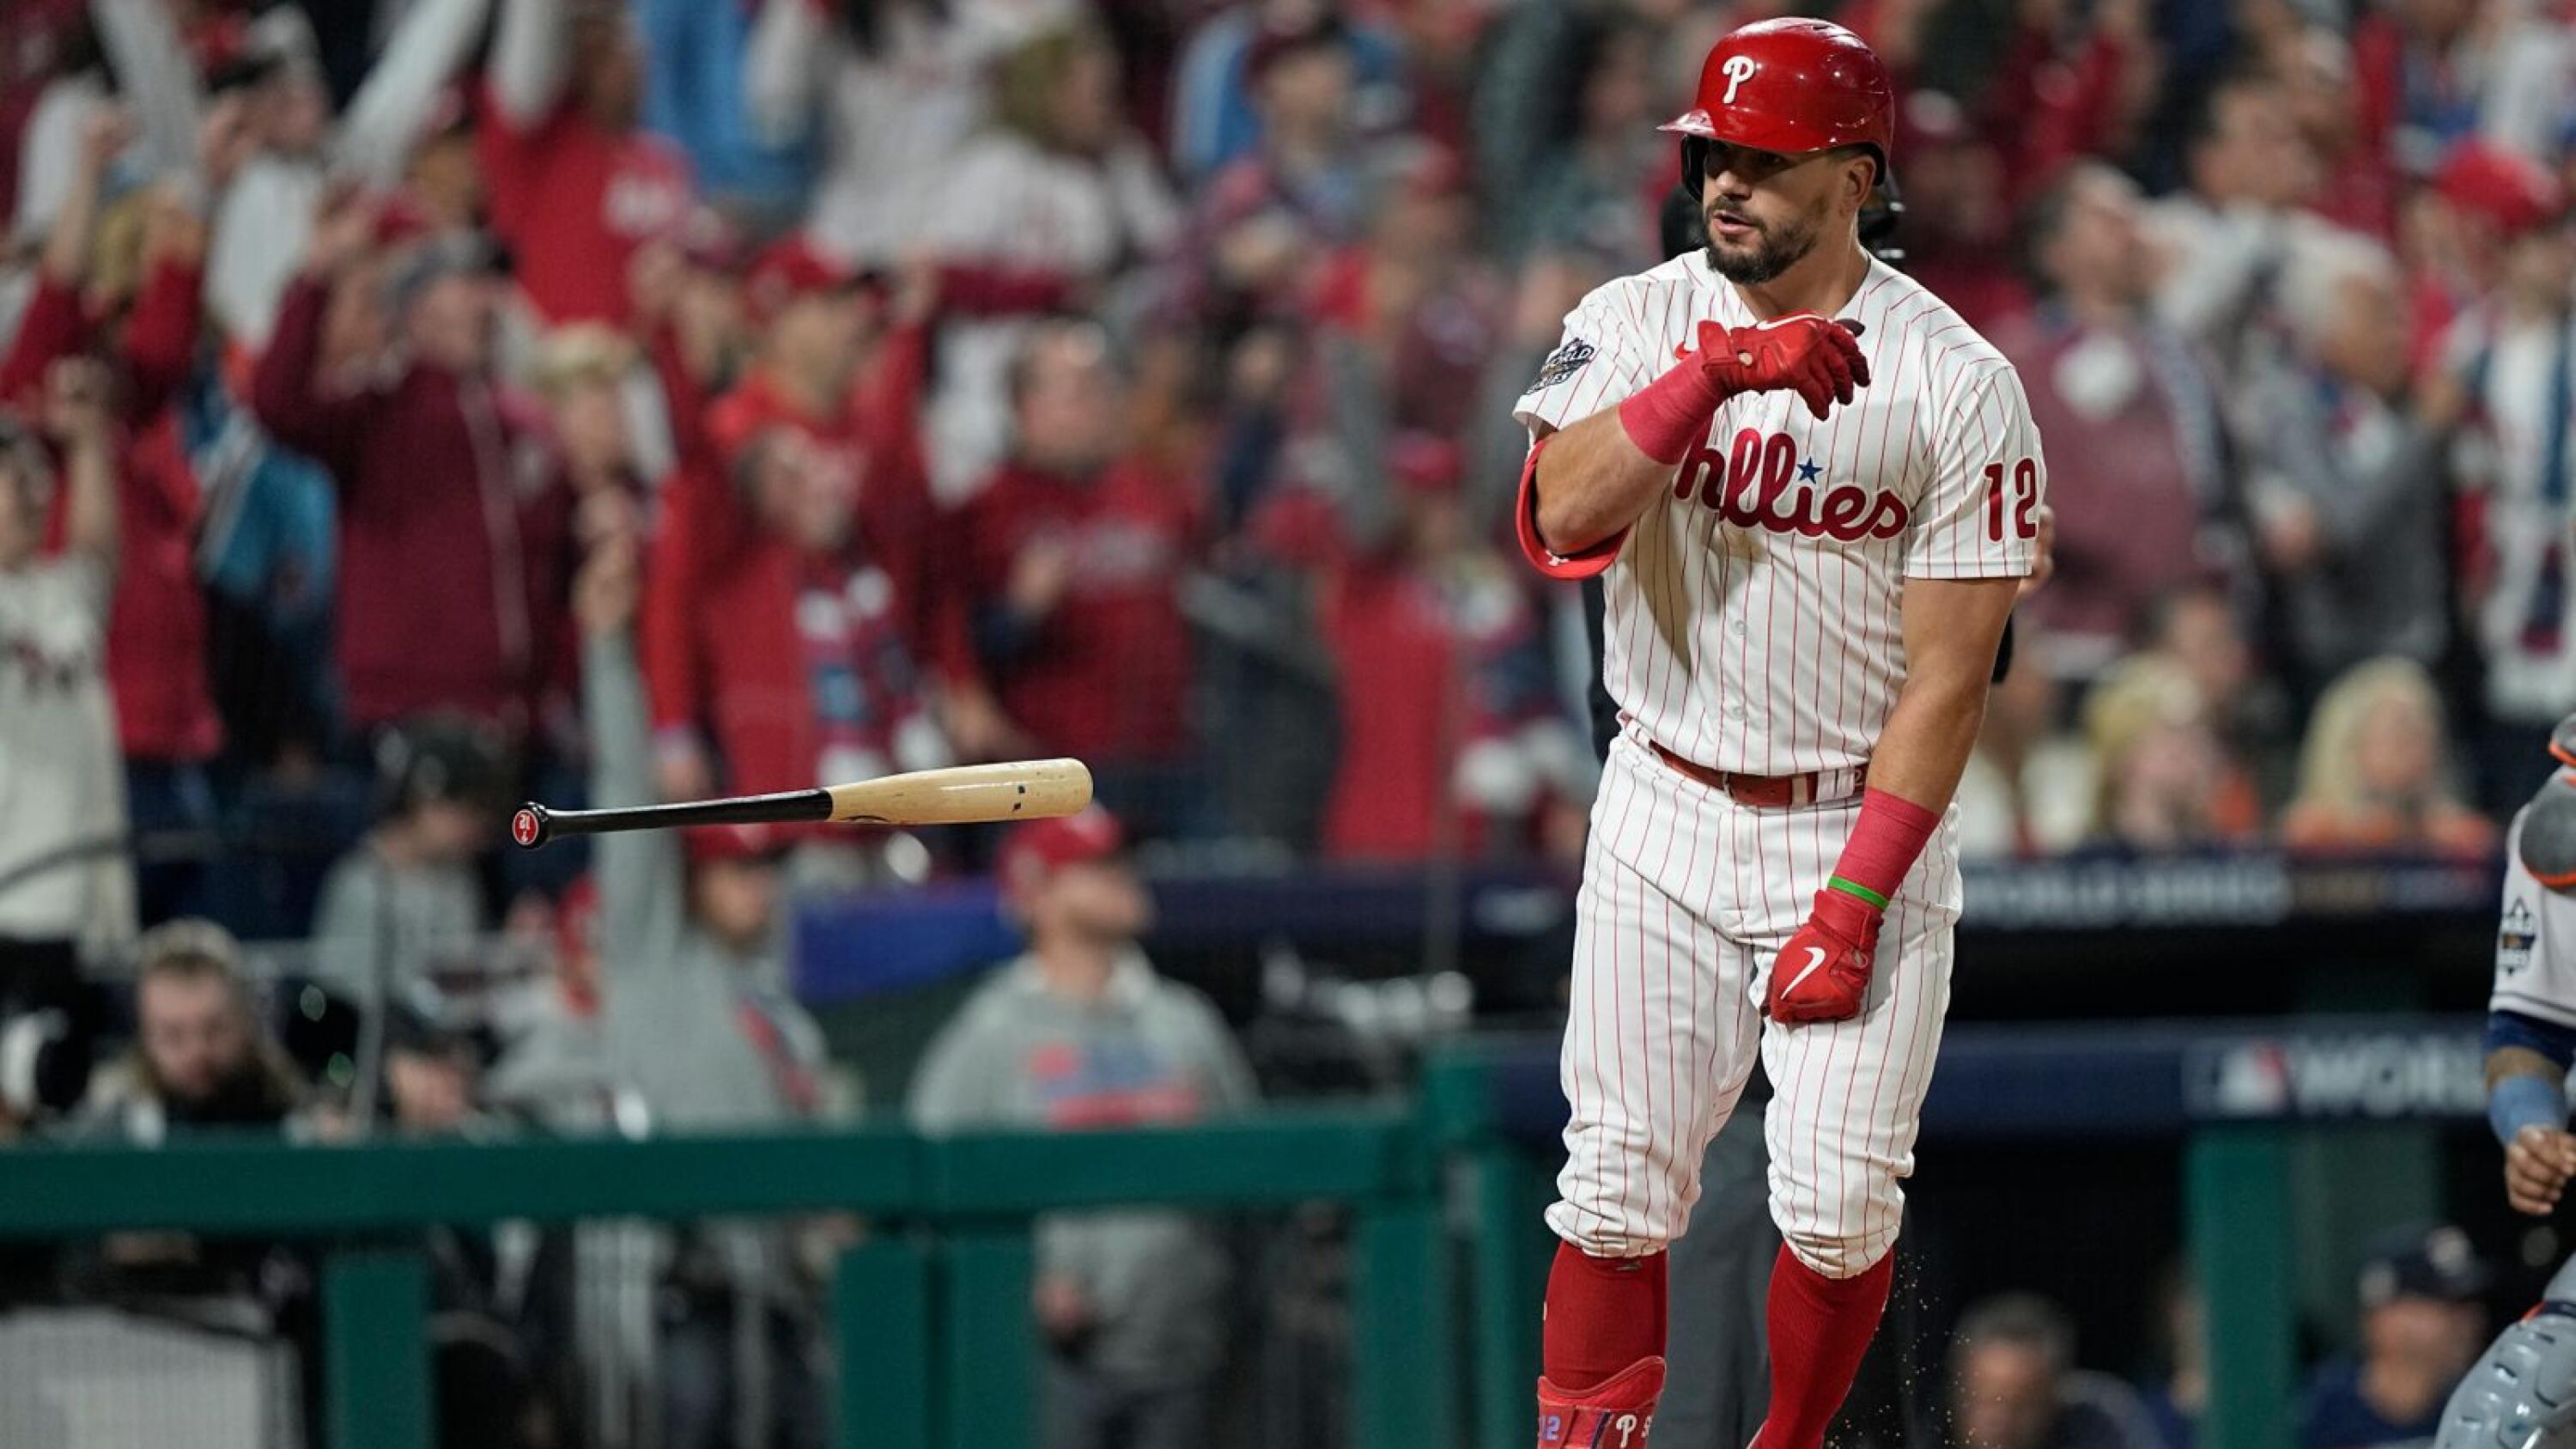 Phillies tie World Series mark with 5 HR, rout Astros in Game 3